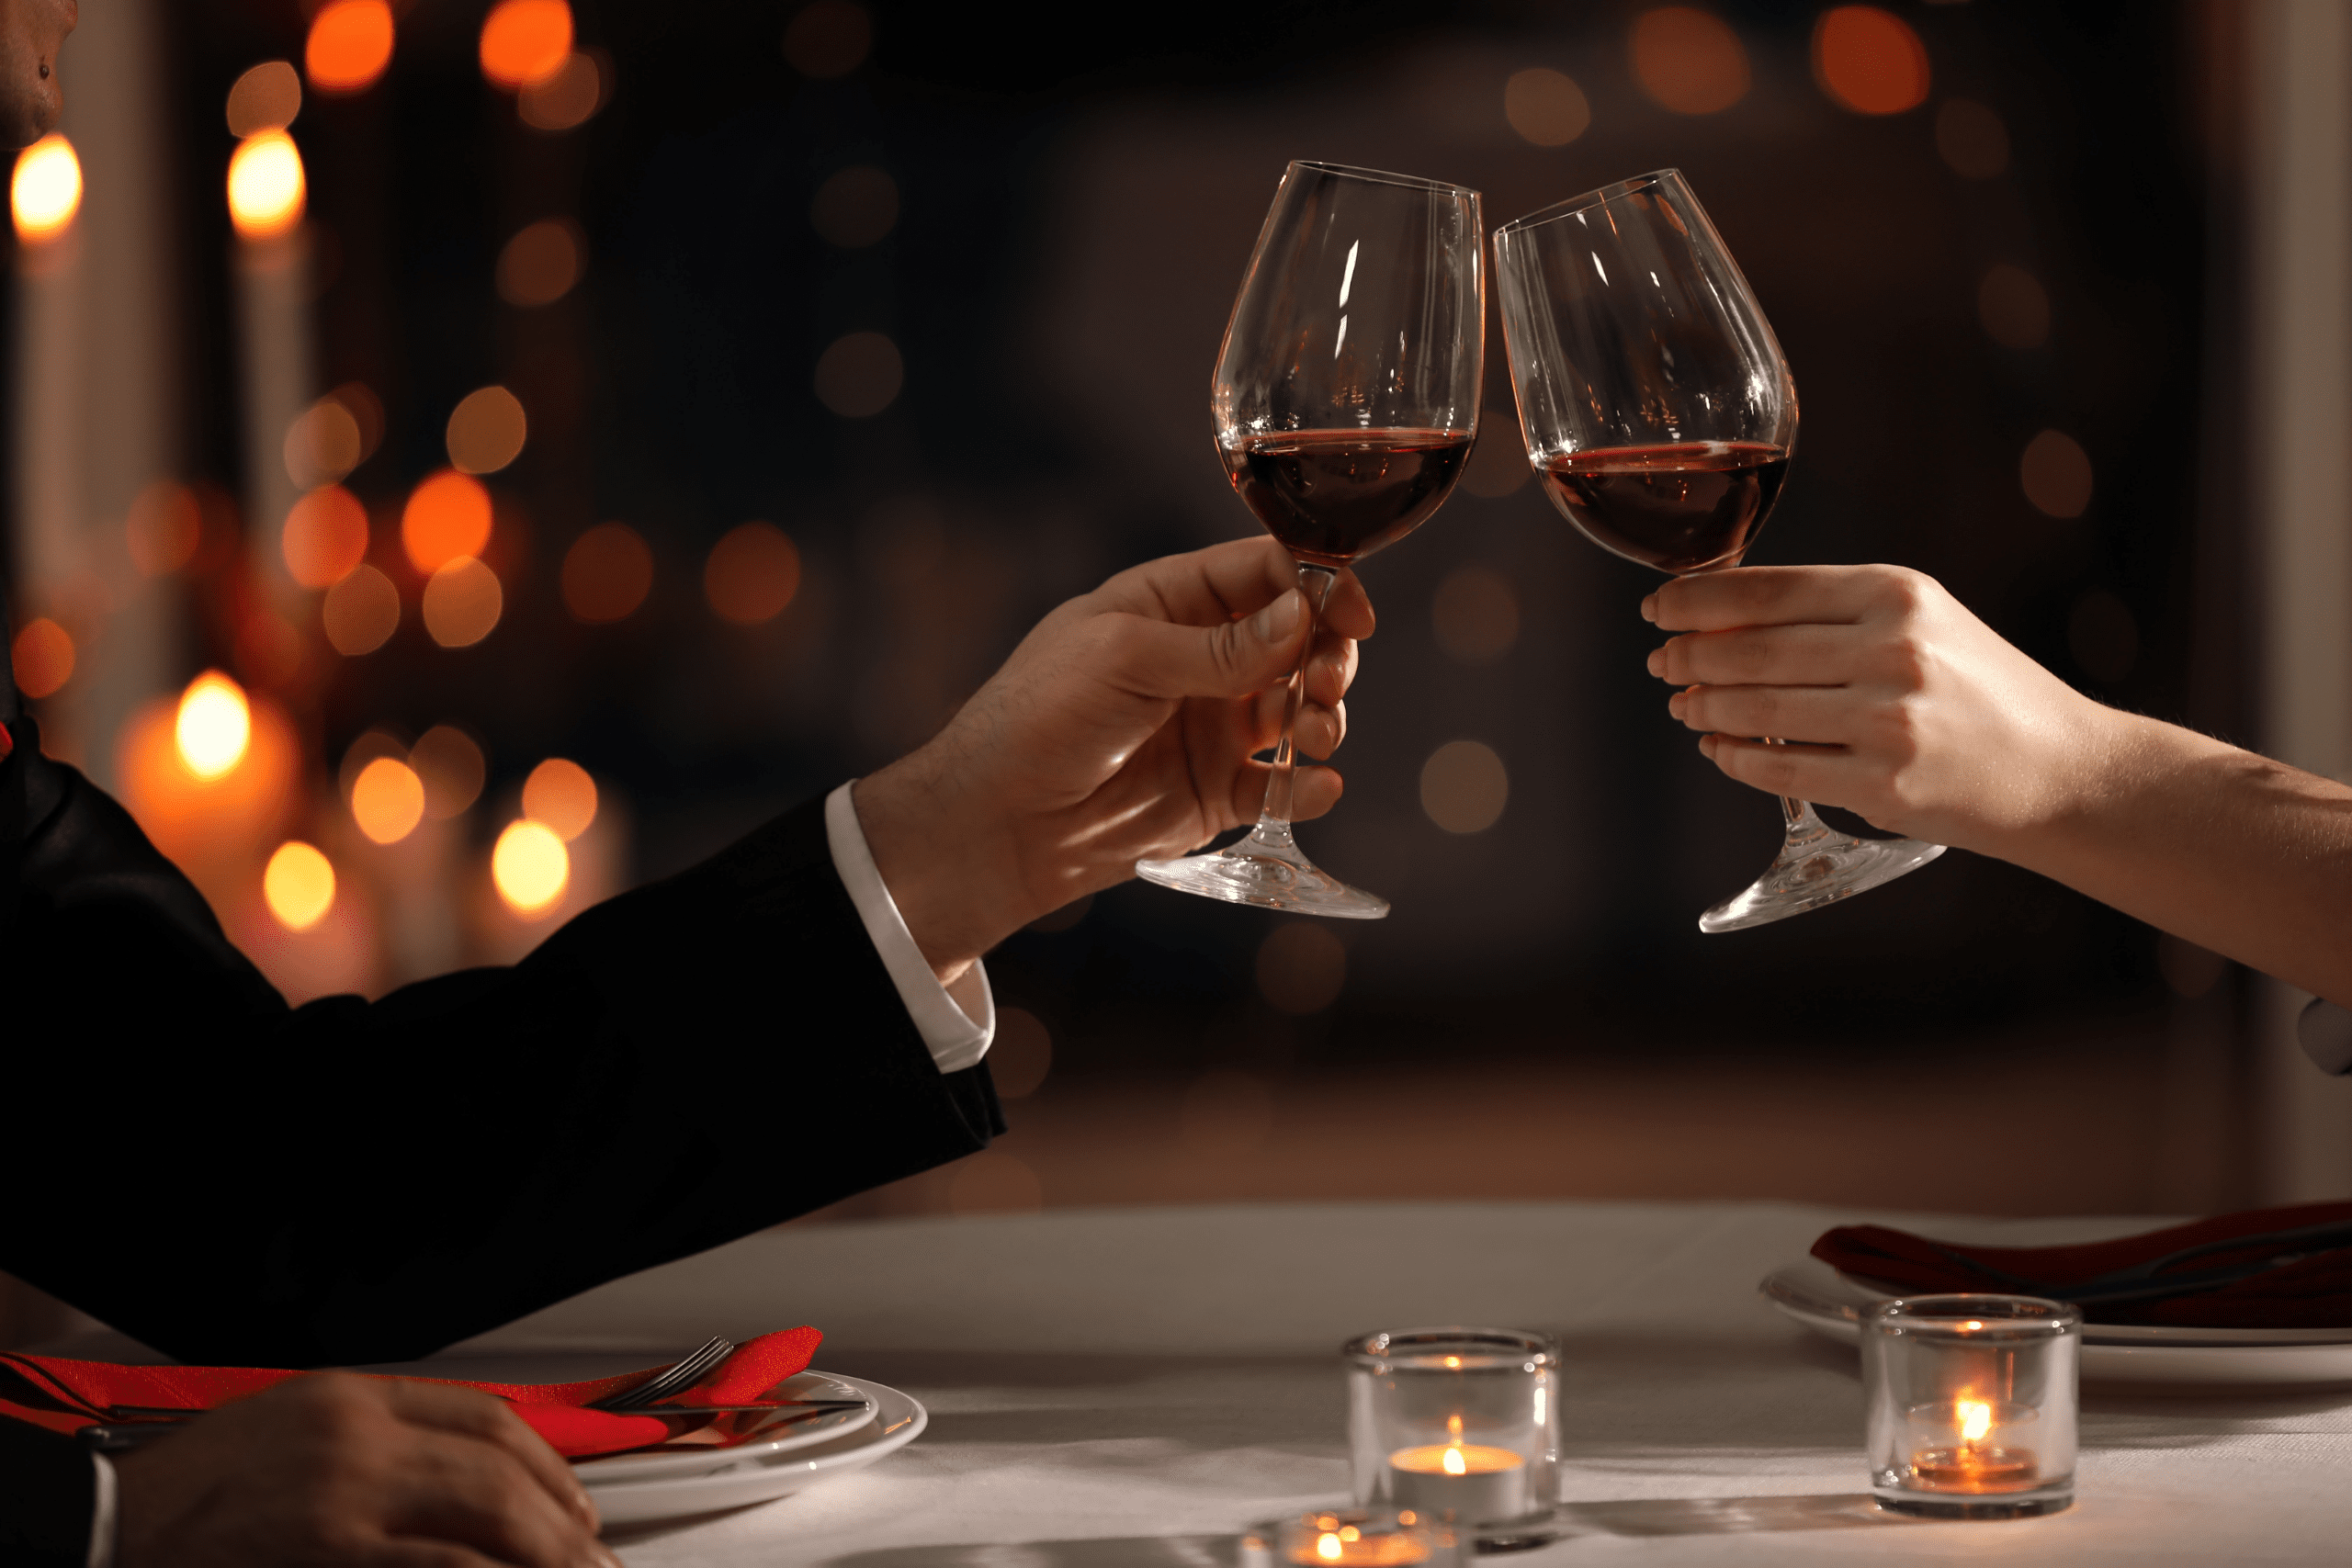 date cheers to wine at a romanic table covered with candles and rose petals